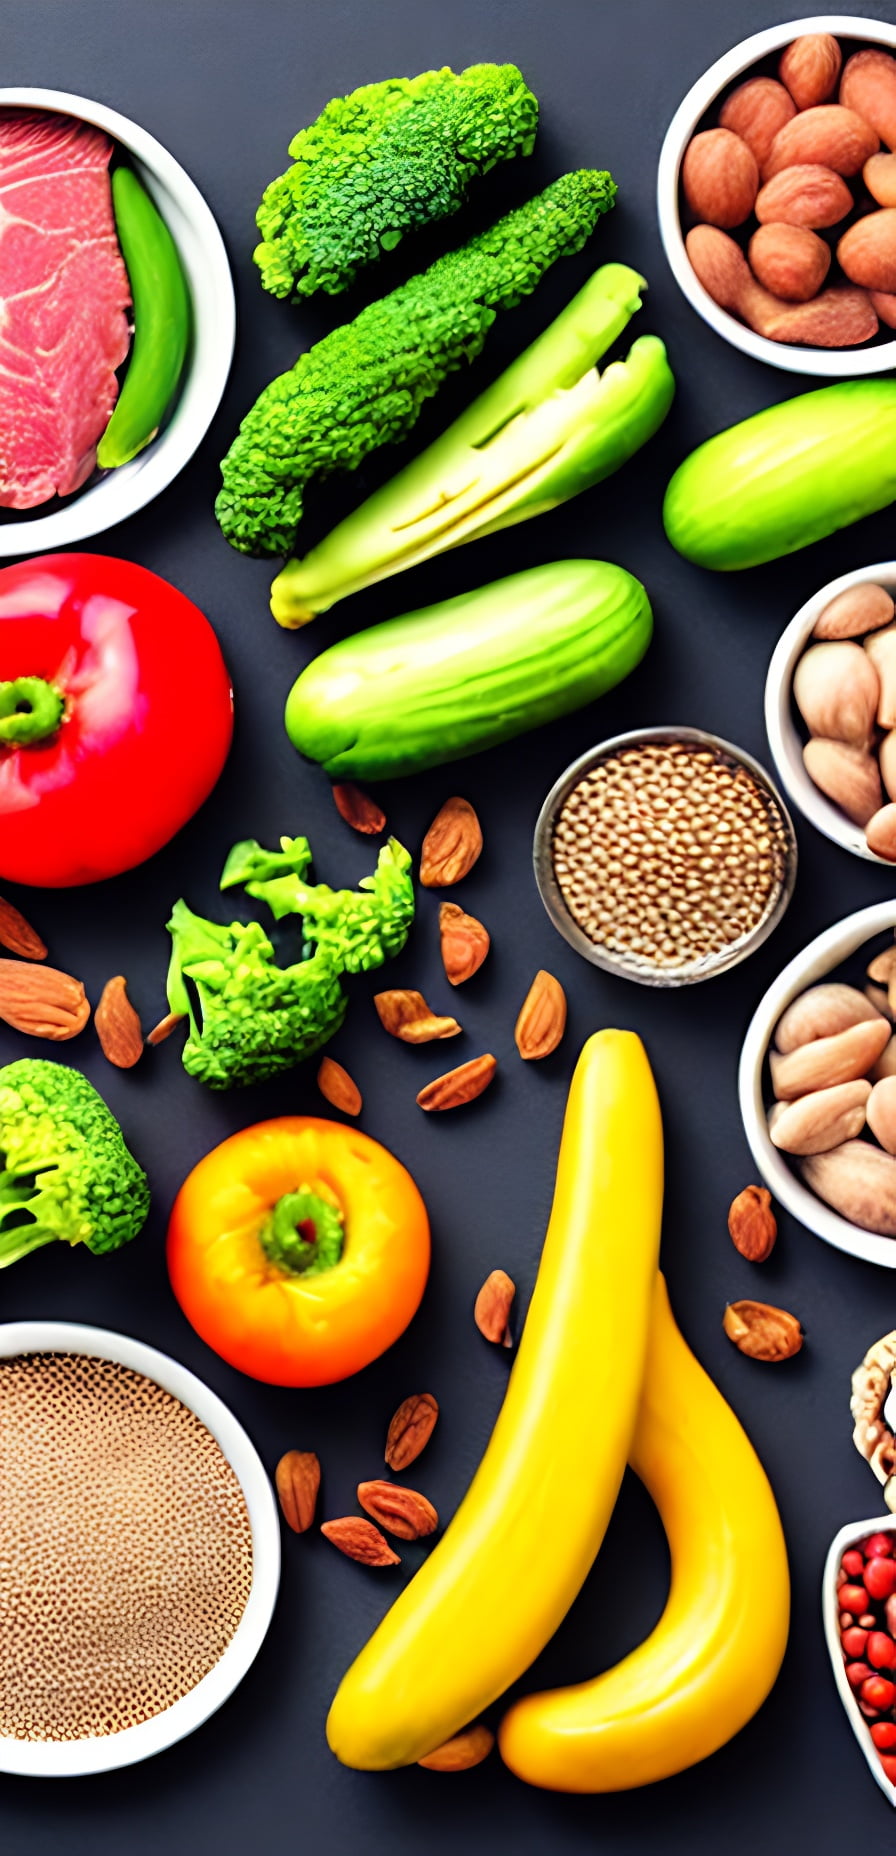 Top nutrition trends for 2023